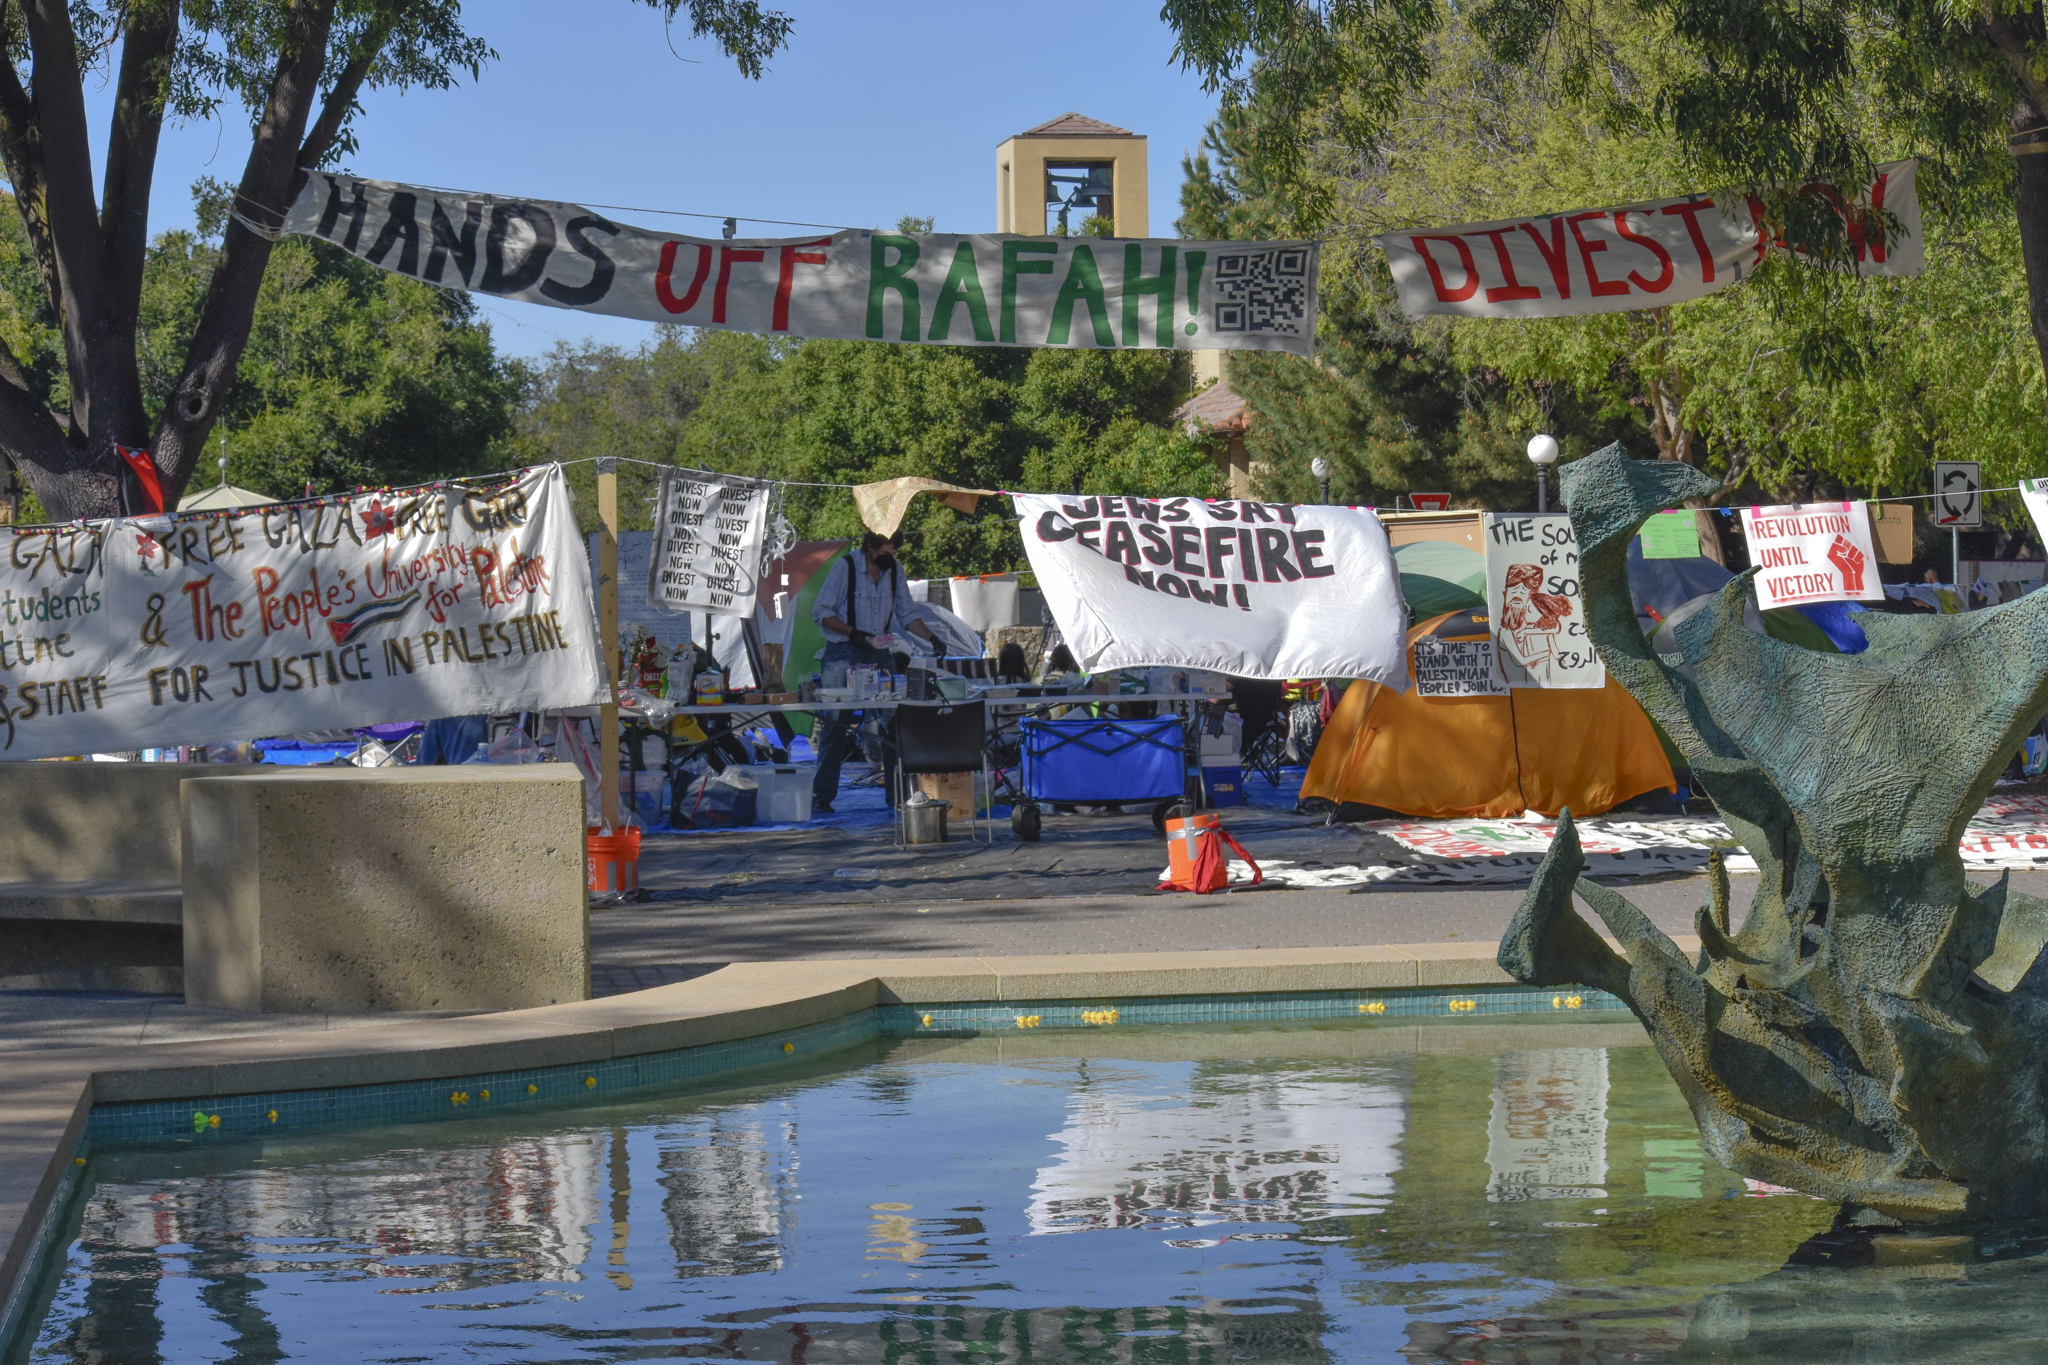 The student encampment at White Plaza. Standing in front of the White Memorial fountain is an encampment surrounded by tents and an outer layer of banners. One sign states “Revolution Until Victory.”